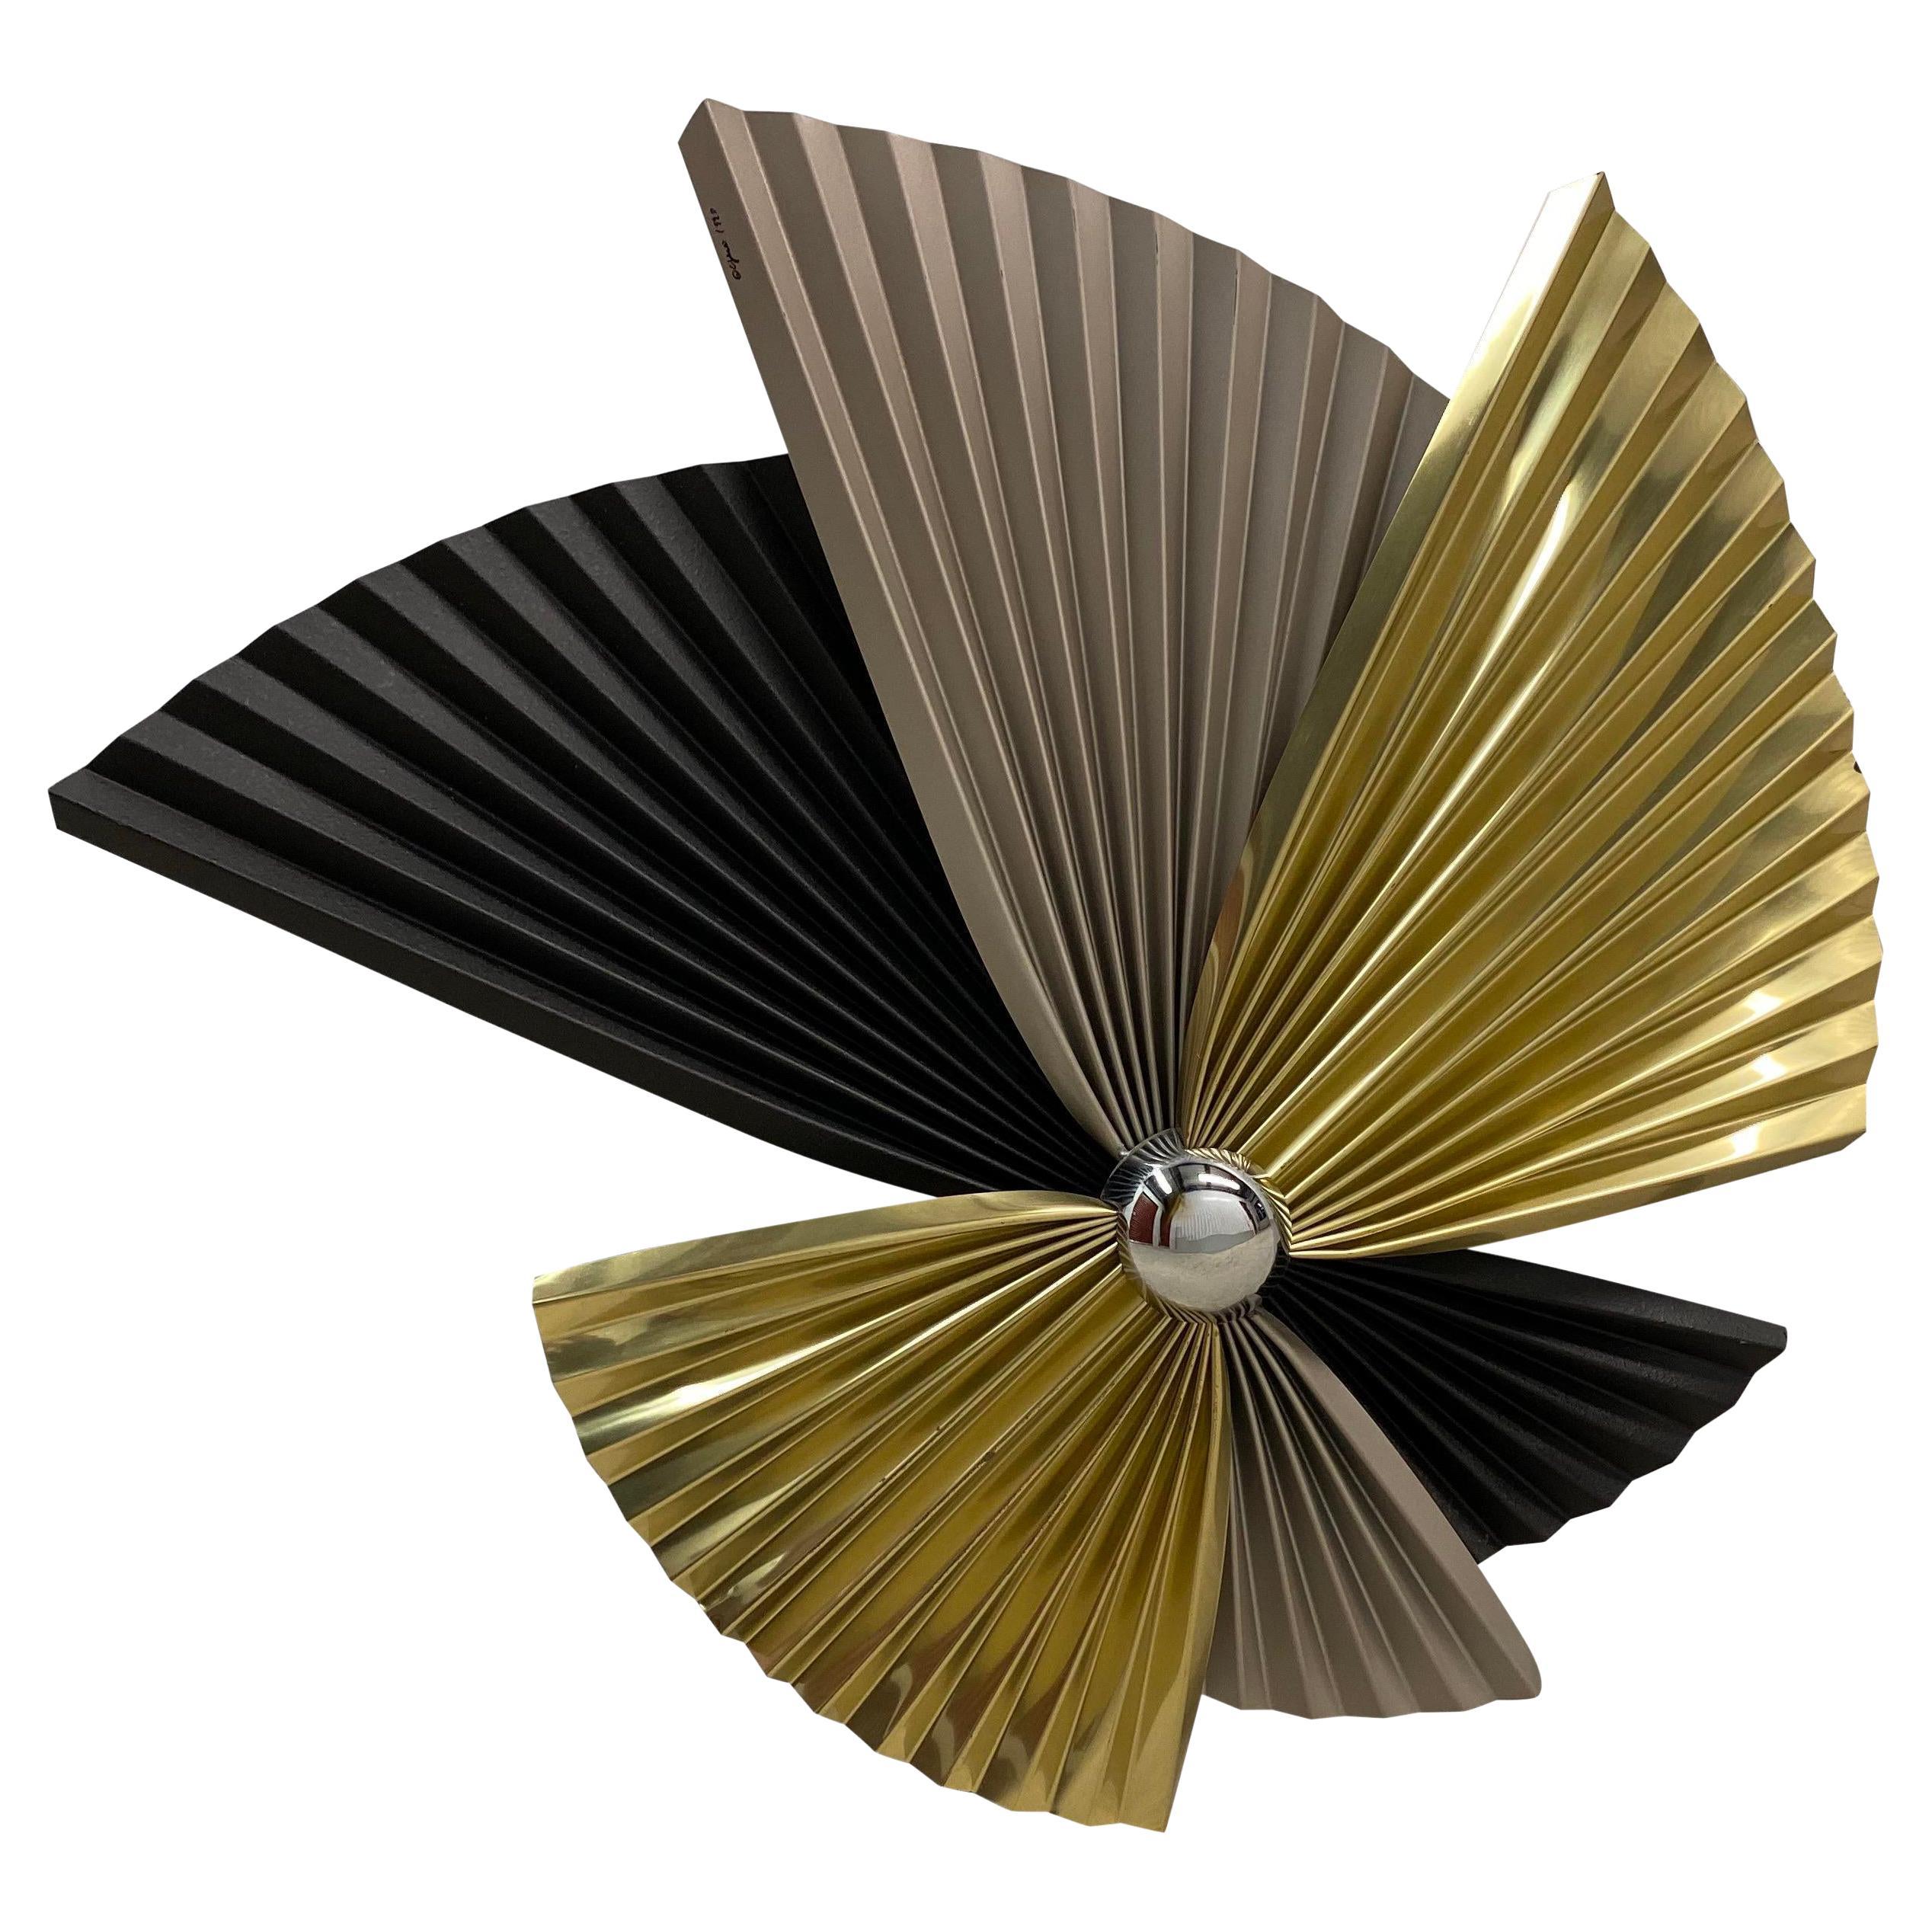 1990s Curtis Jere Pleated Fan Wall Sculpture For Sale